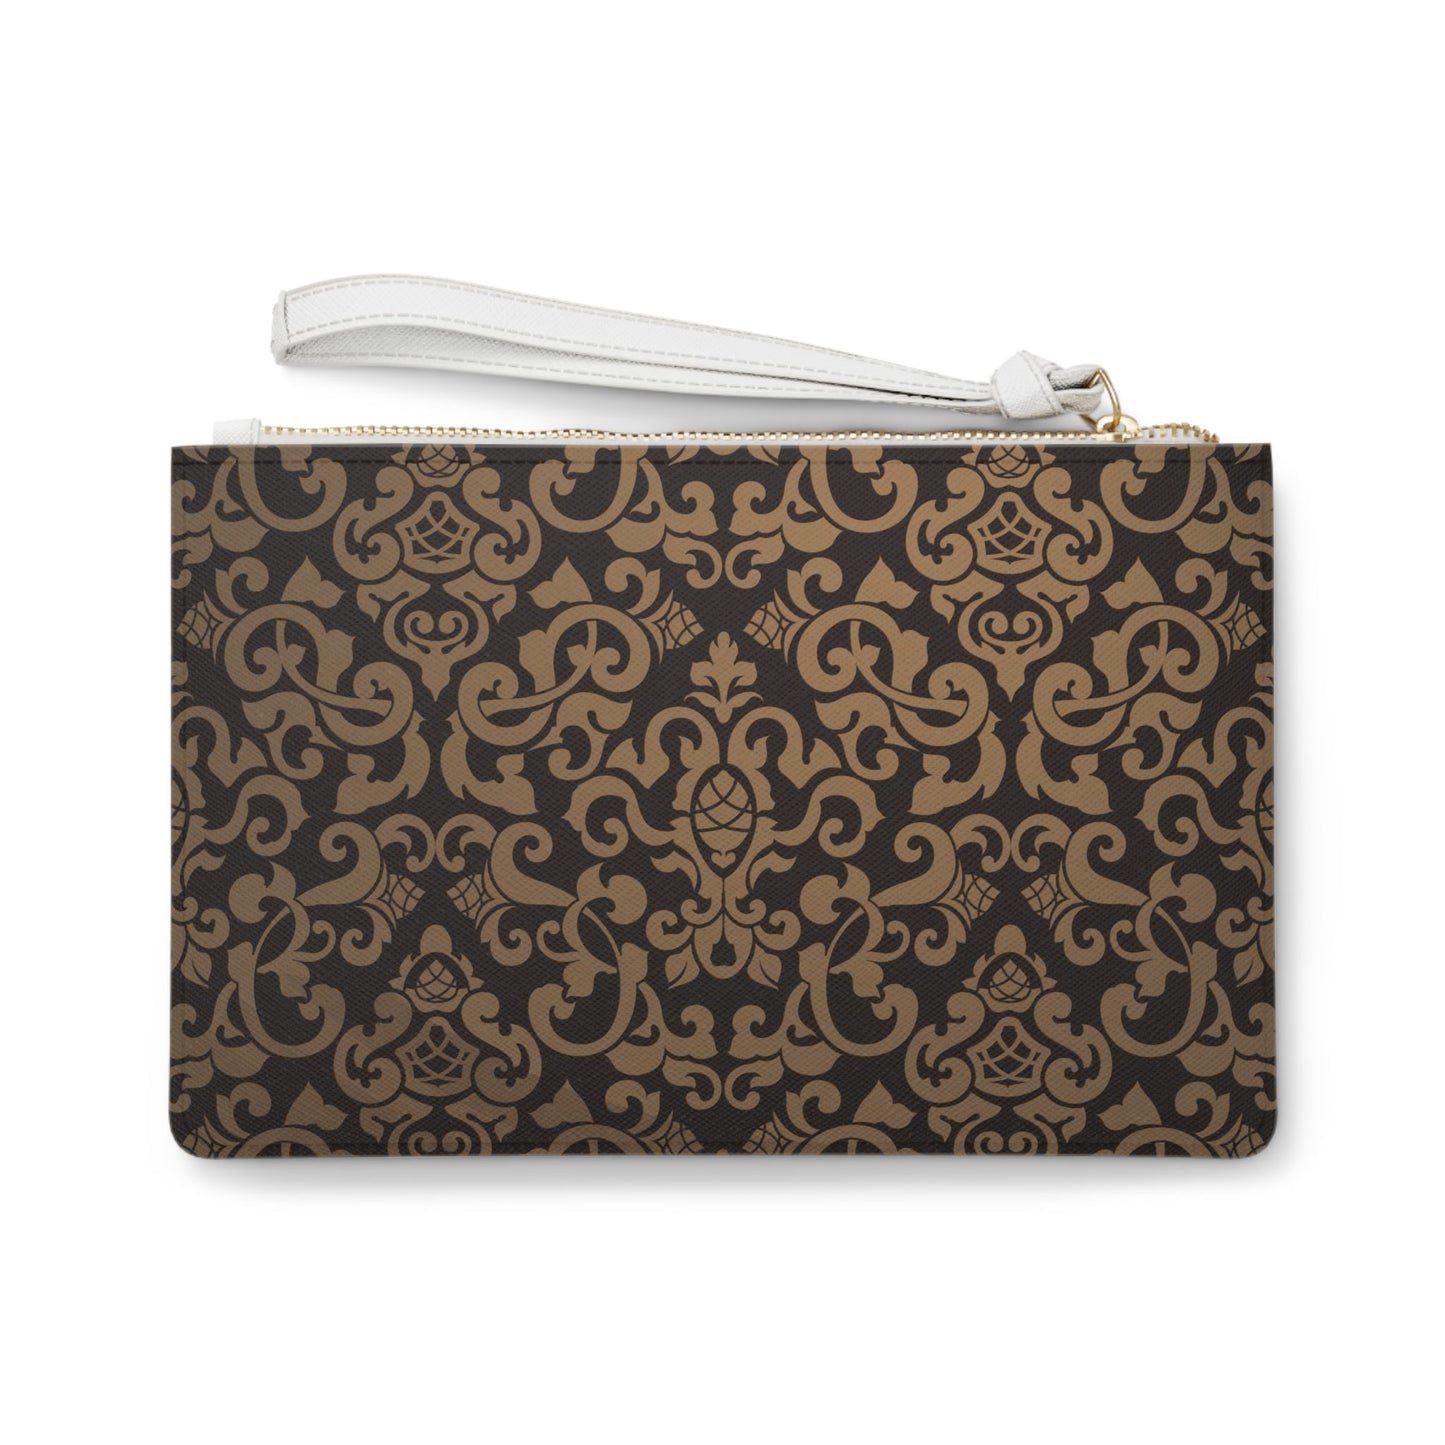 Bags - Victorian Style Clutch Bag